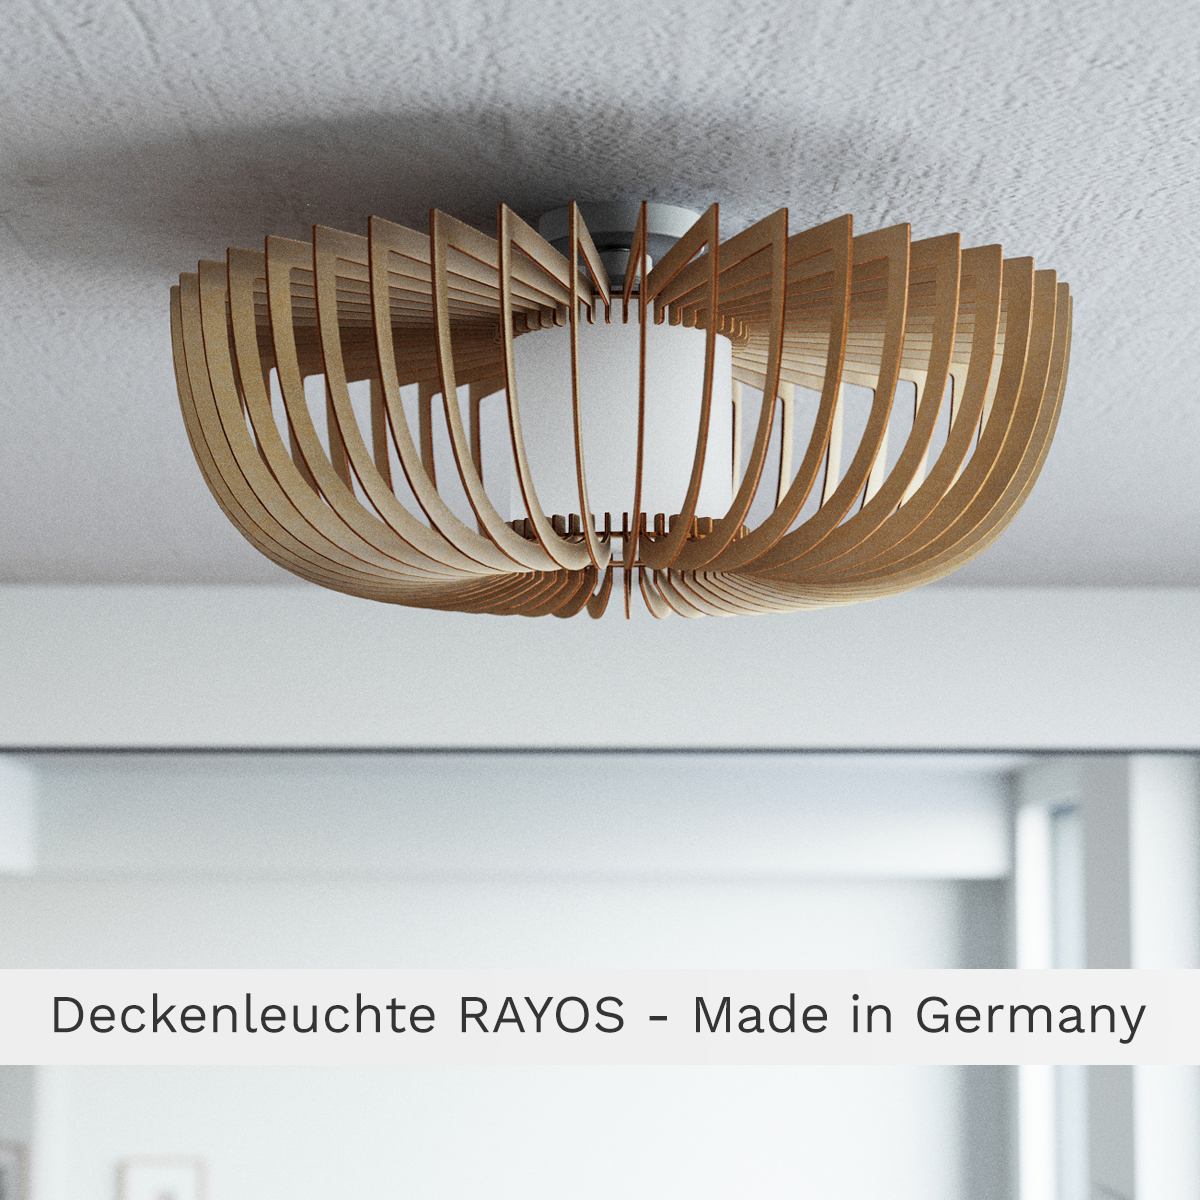 Deckenleuchte RAYOS - Made in Germany